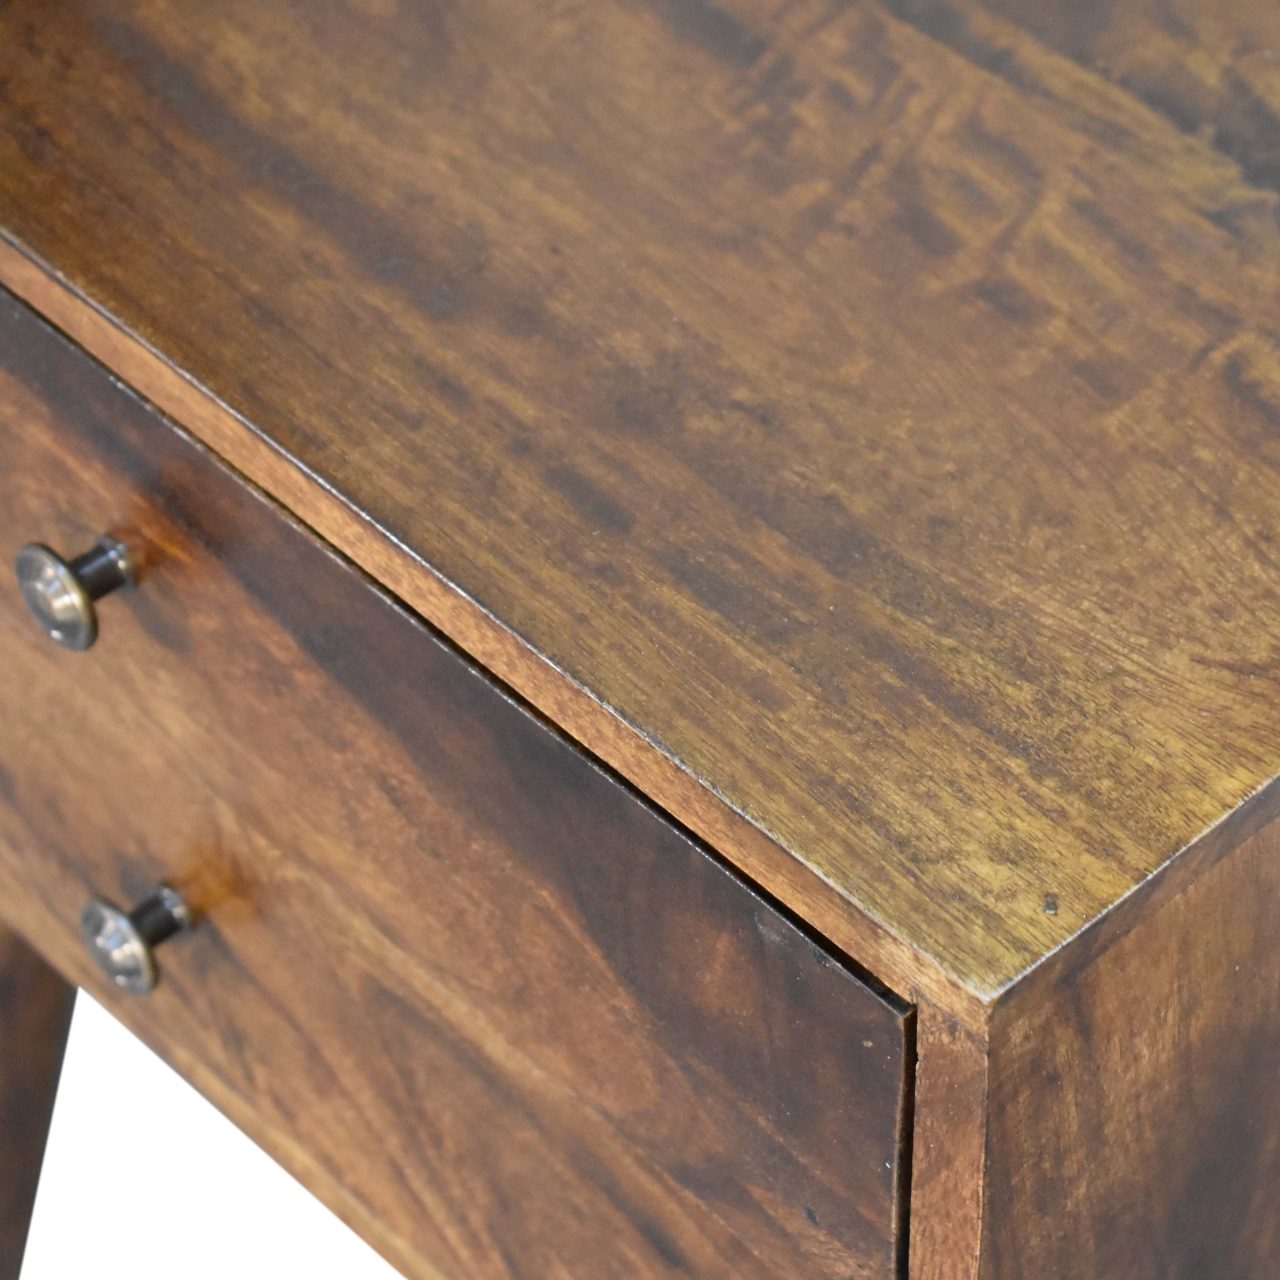 Blake handmade solid wood bedside table with 2 drawers in a deep chestnut finish | malletandplane.com